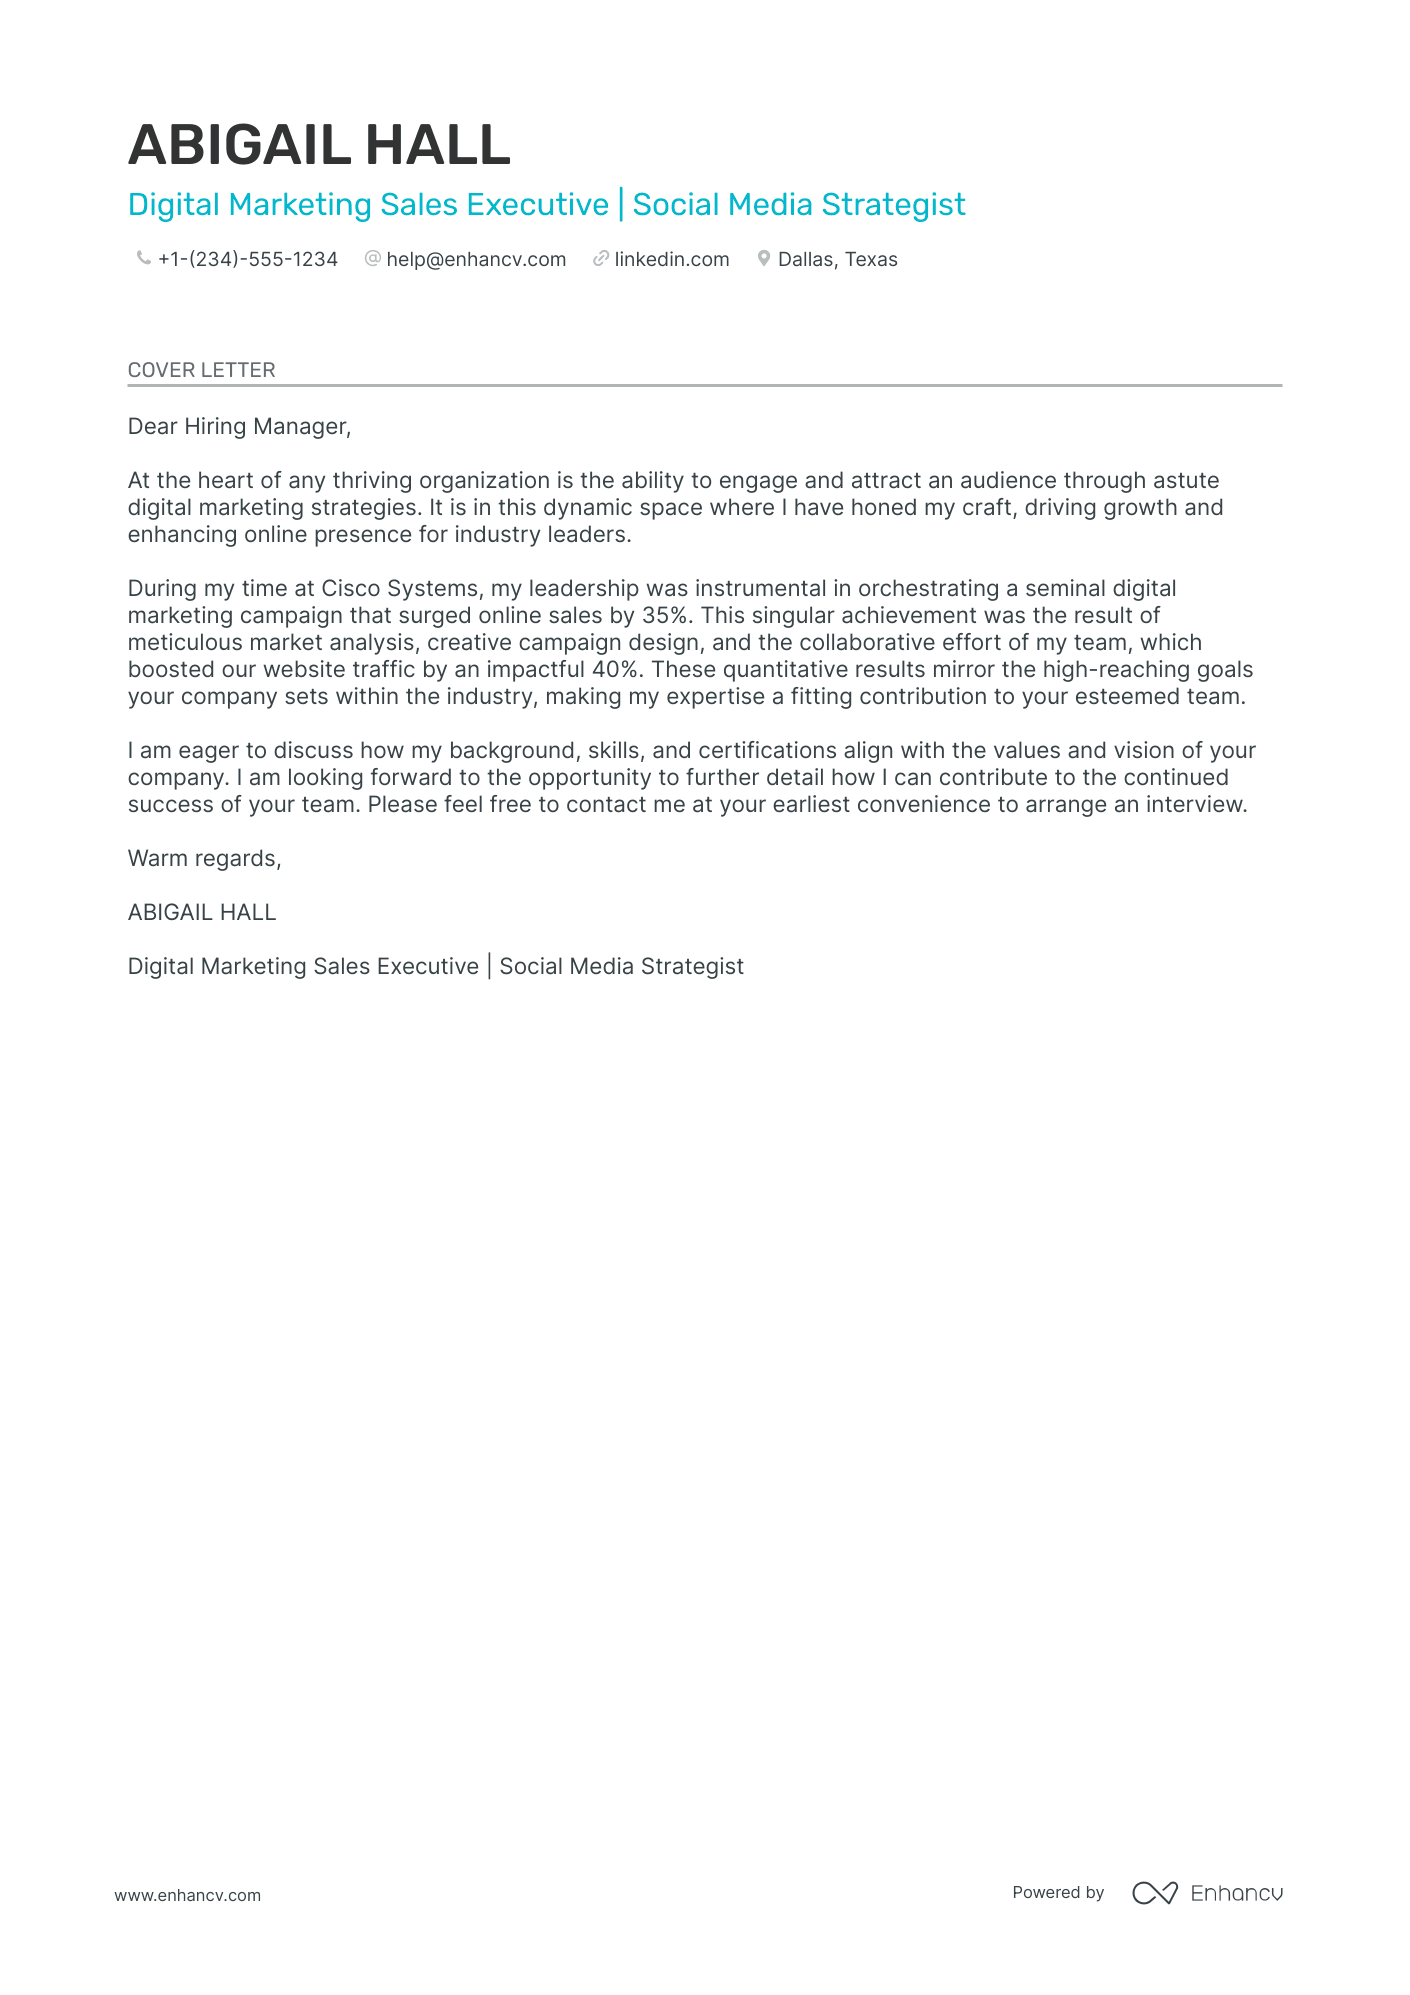 account executive cover letter email